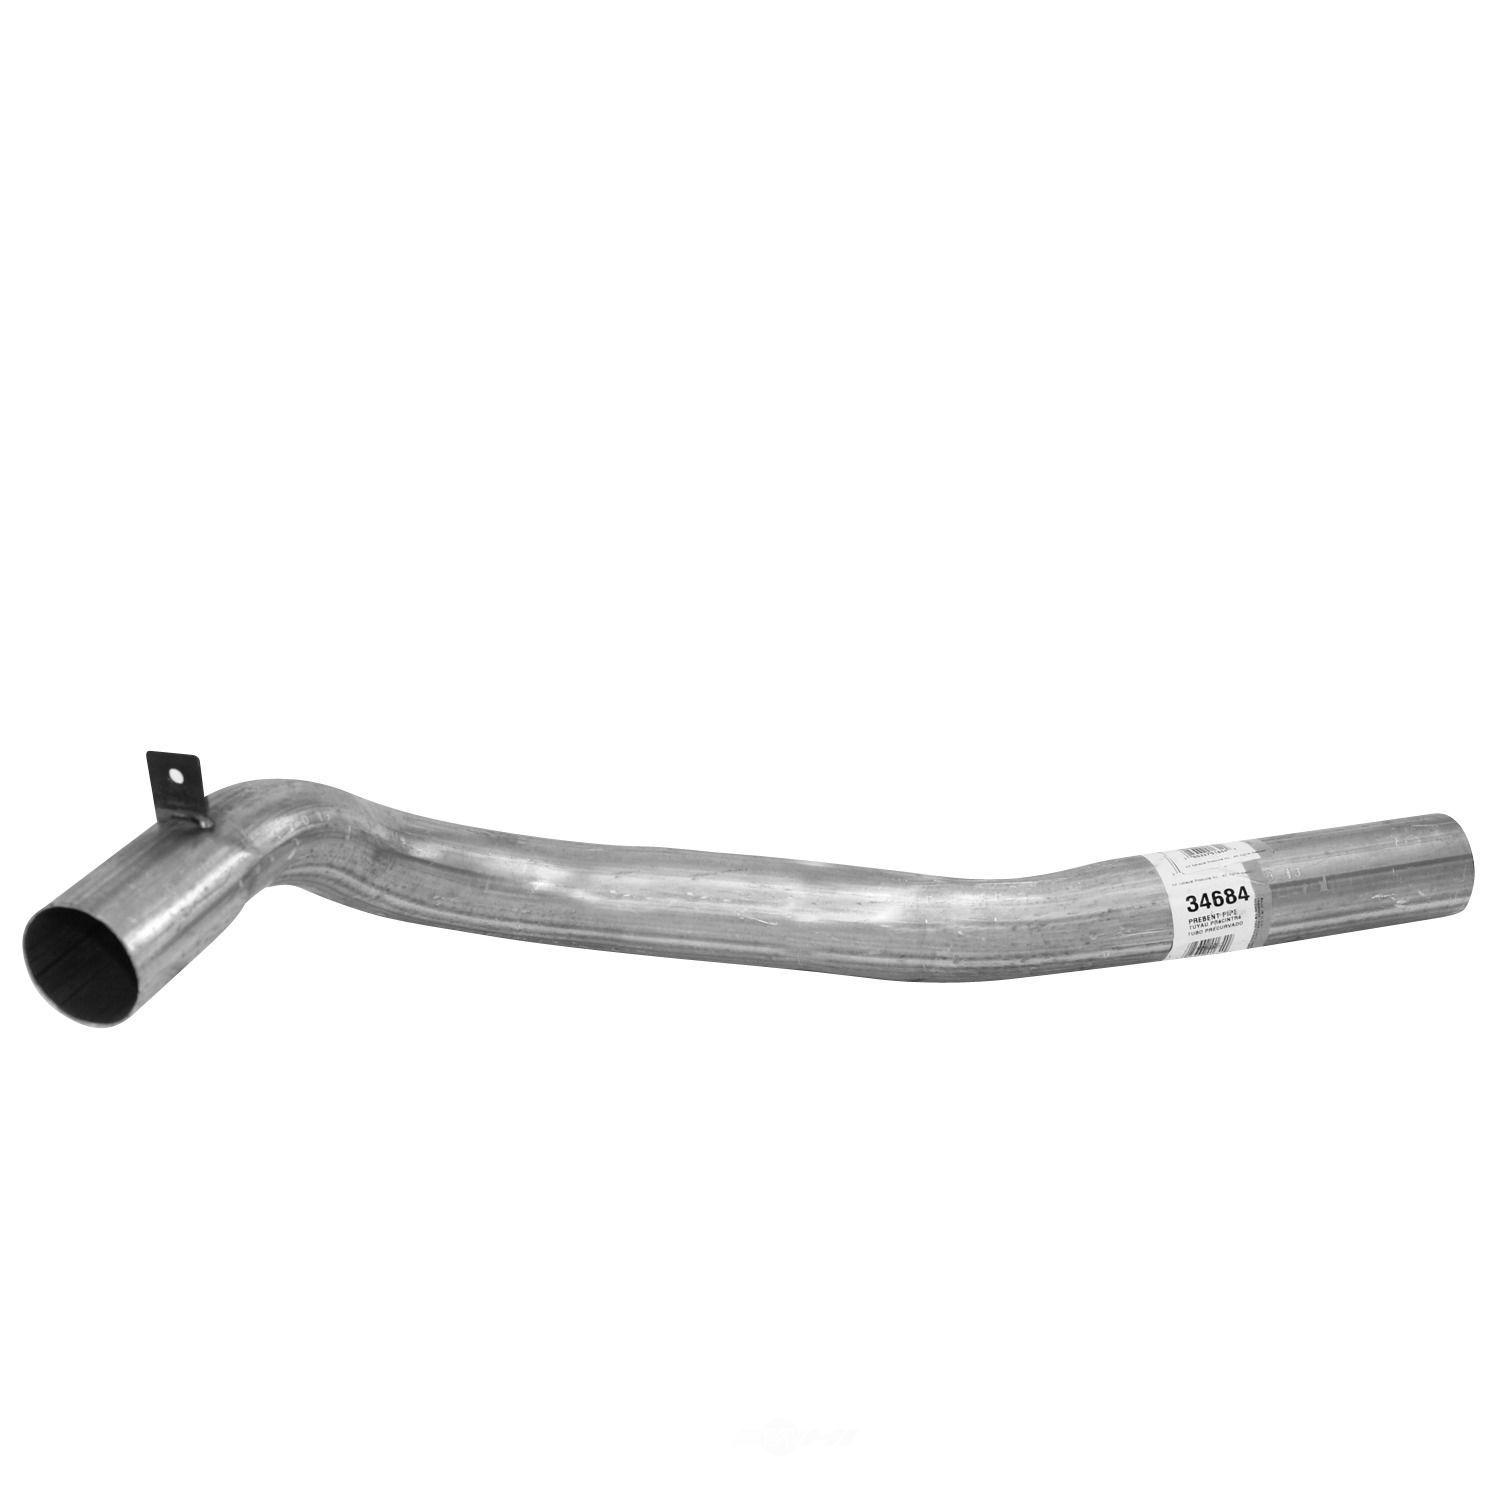 AP EXHAUST W/FEDERAL CONVERTER - Exhaust Tail Pipe - APF 34684